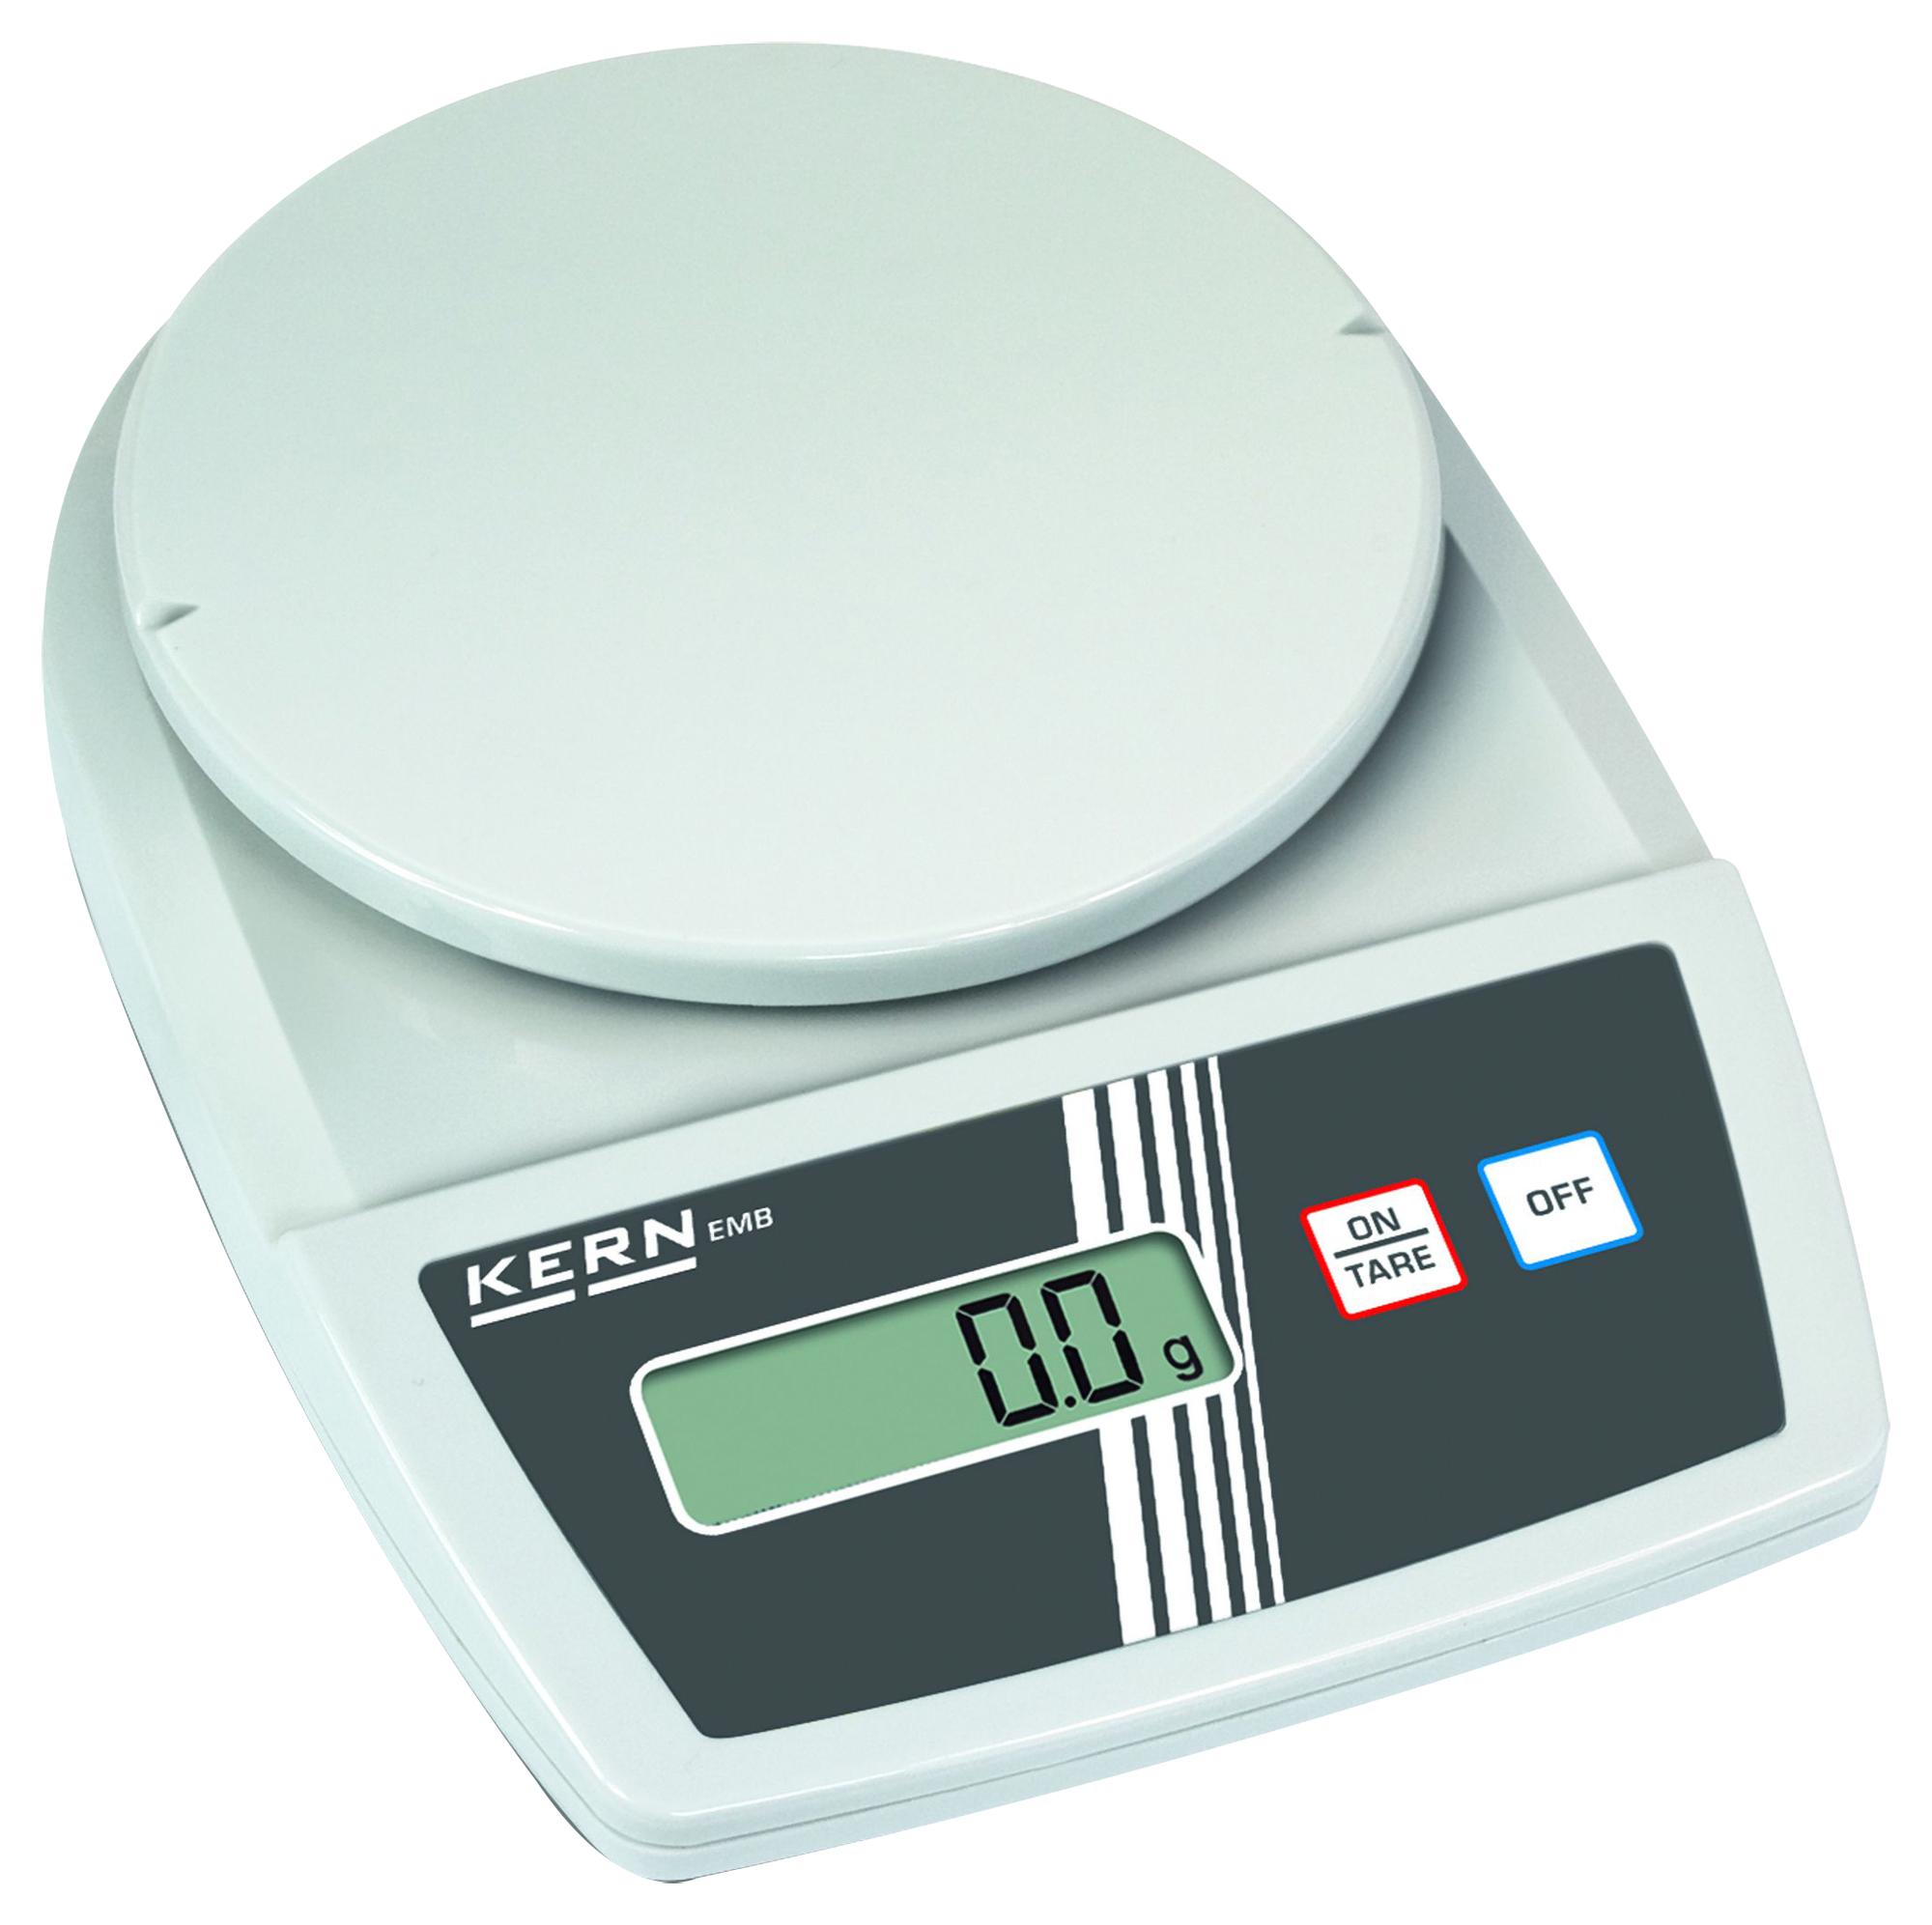 EMB 1200-1 WEIGHING SCALE, PRECISION, 1.2KG KERN